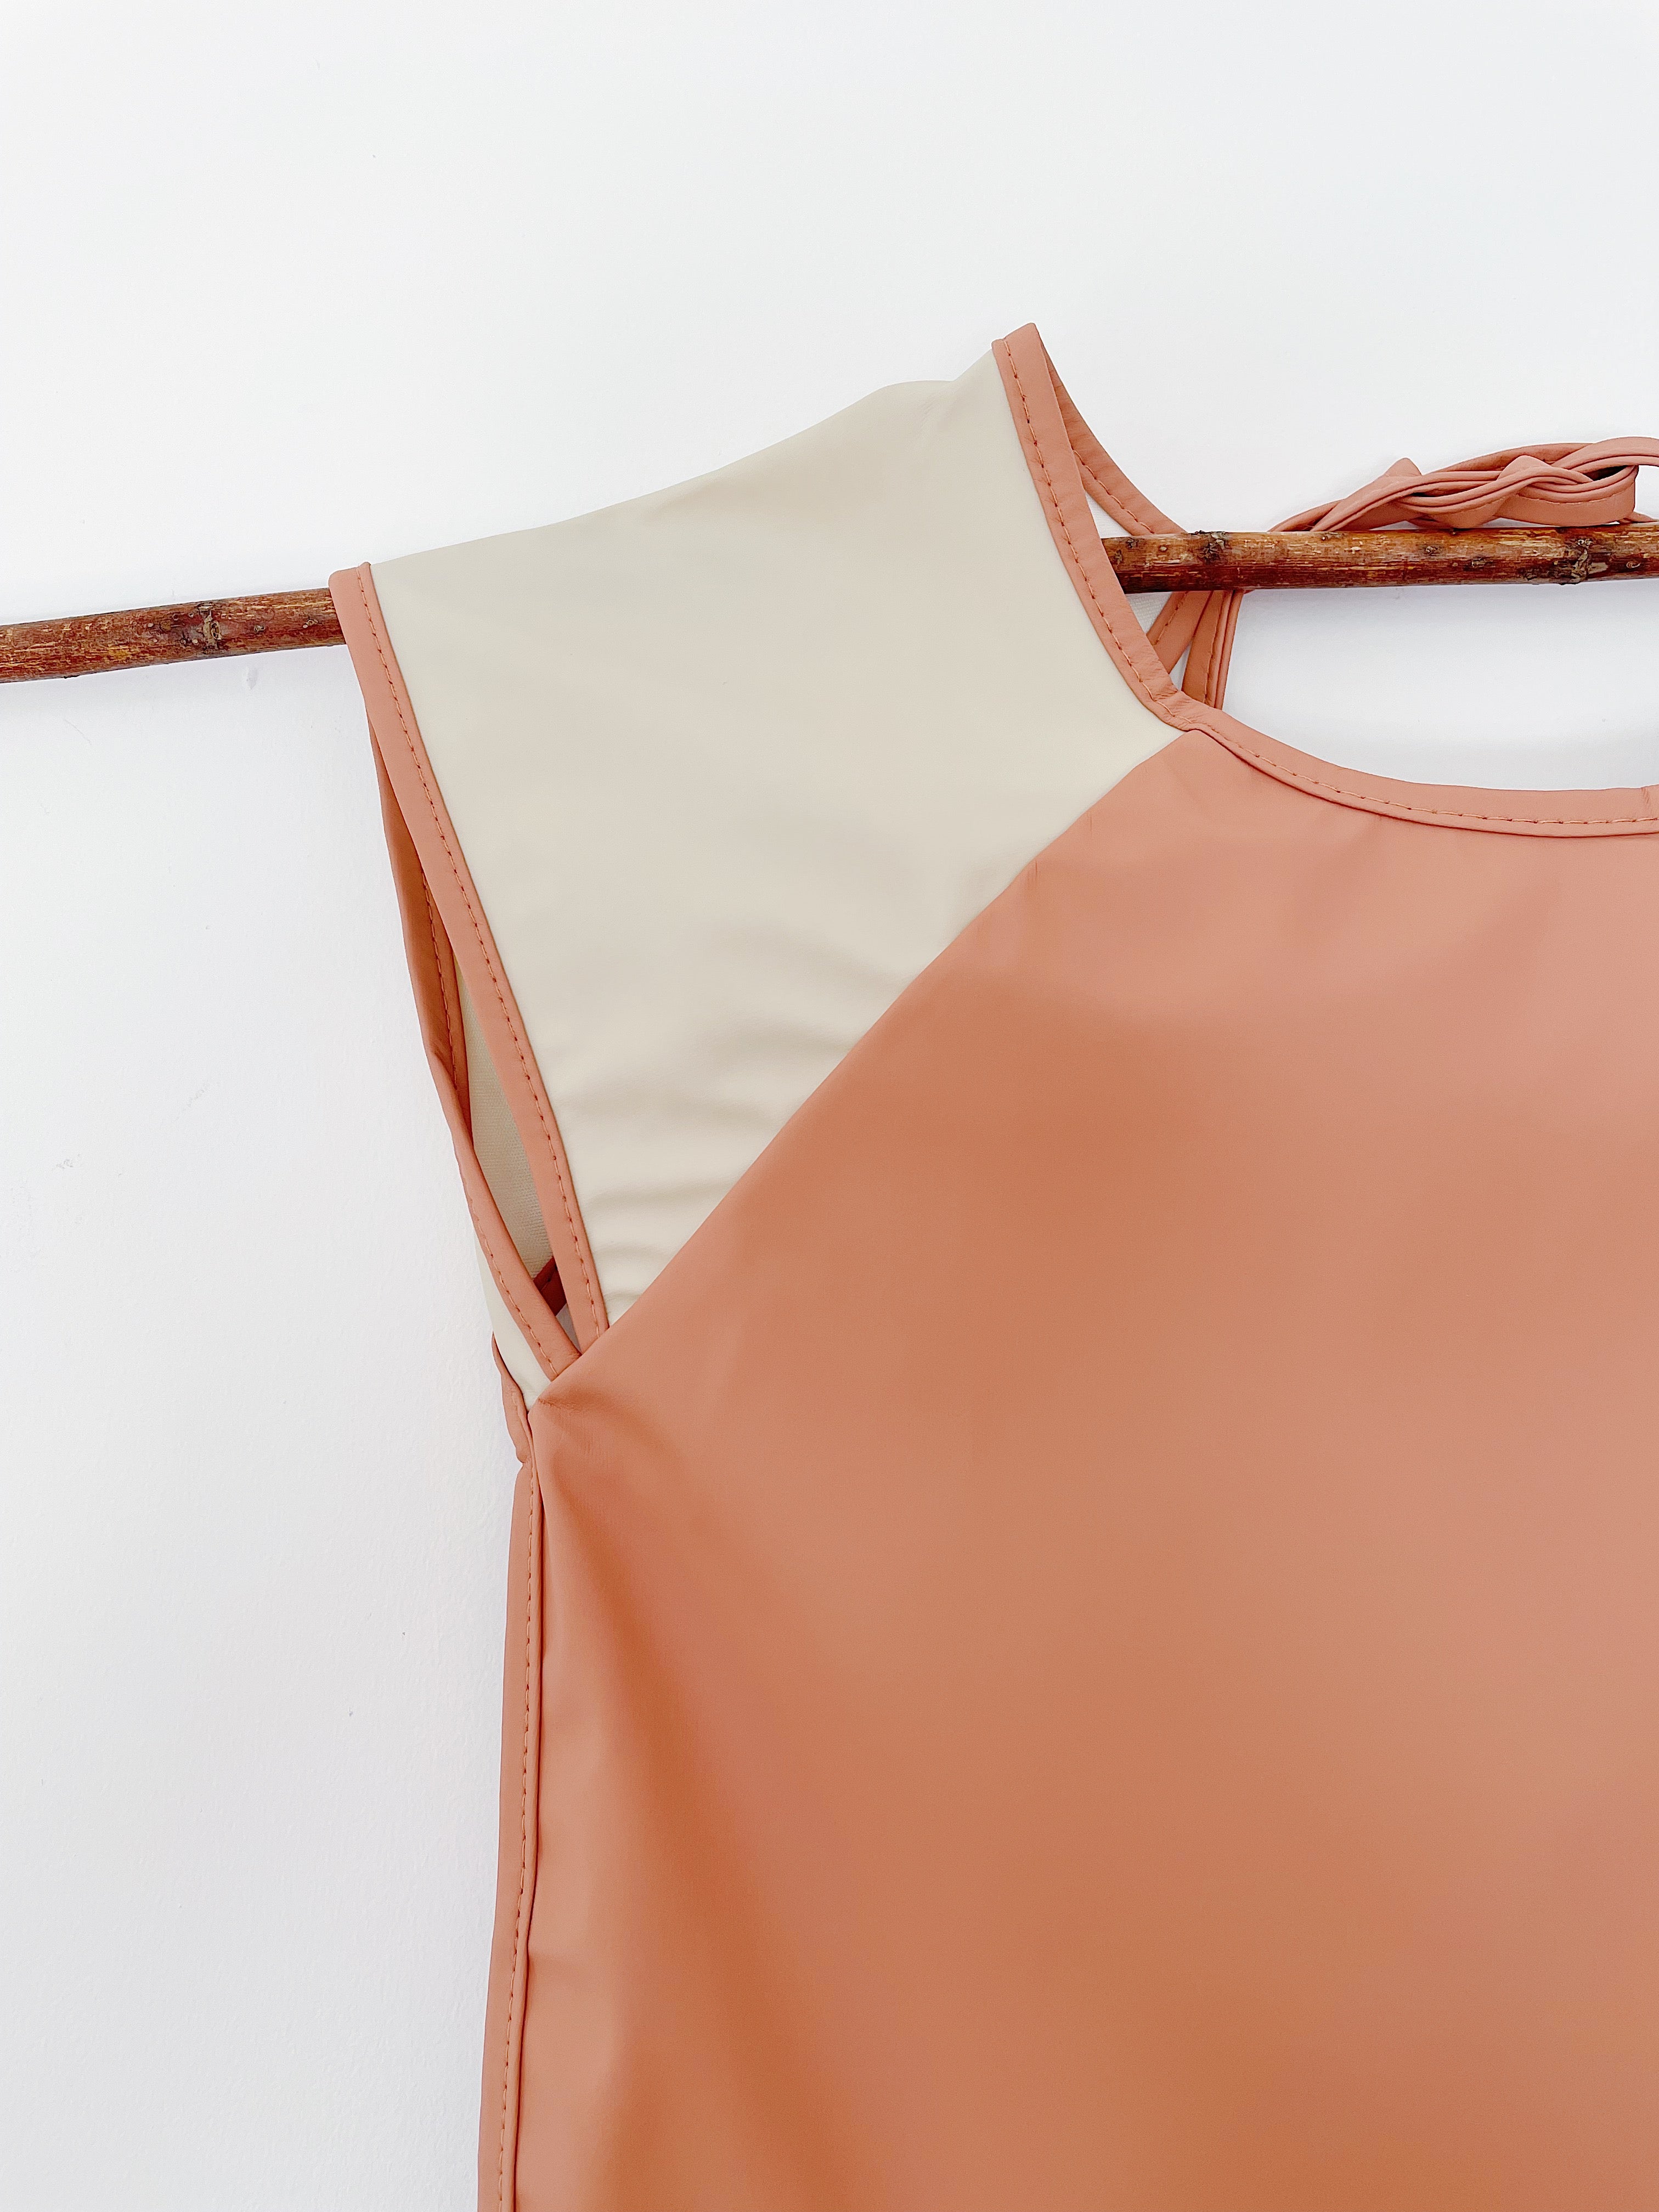 Stylish and Sustainable Aprons for Kids: SKÅGFÄ's Vinklar Waterproof, Their First Apron Collection with Front Pocket